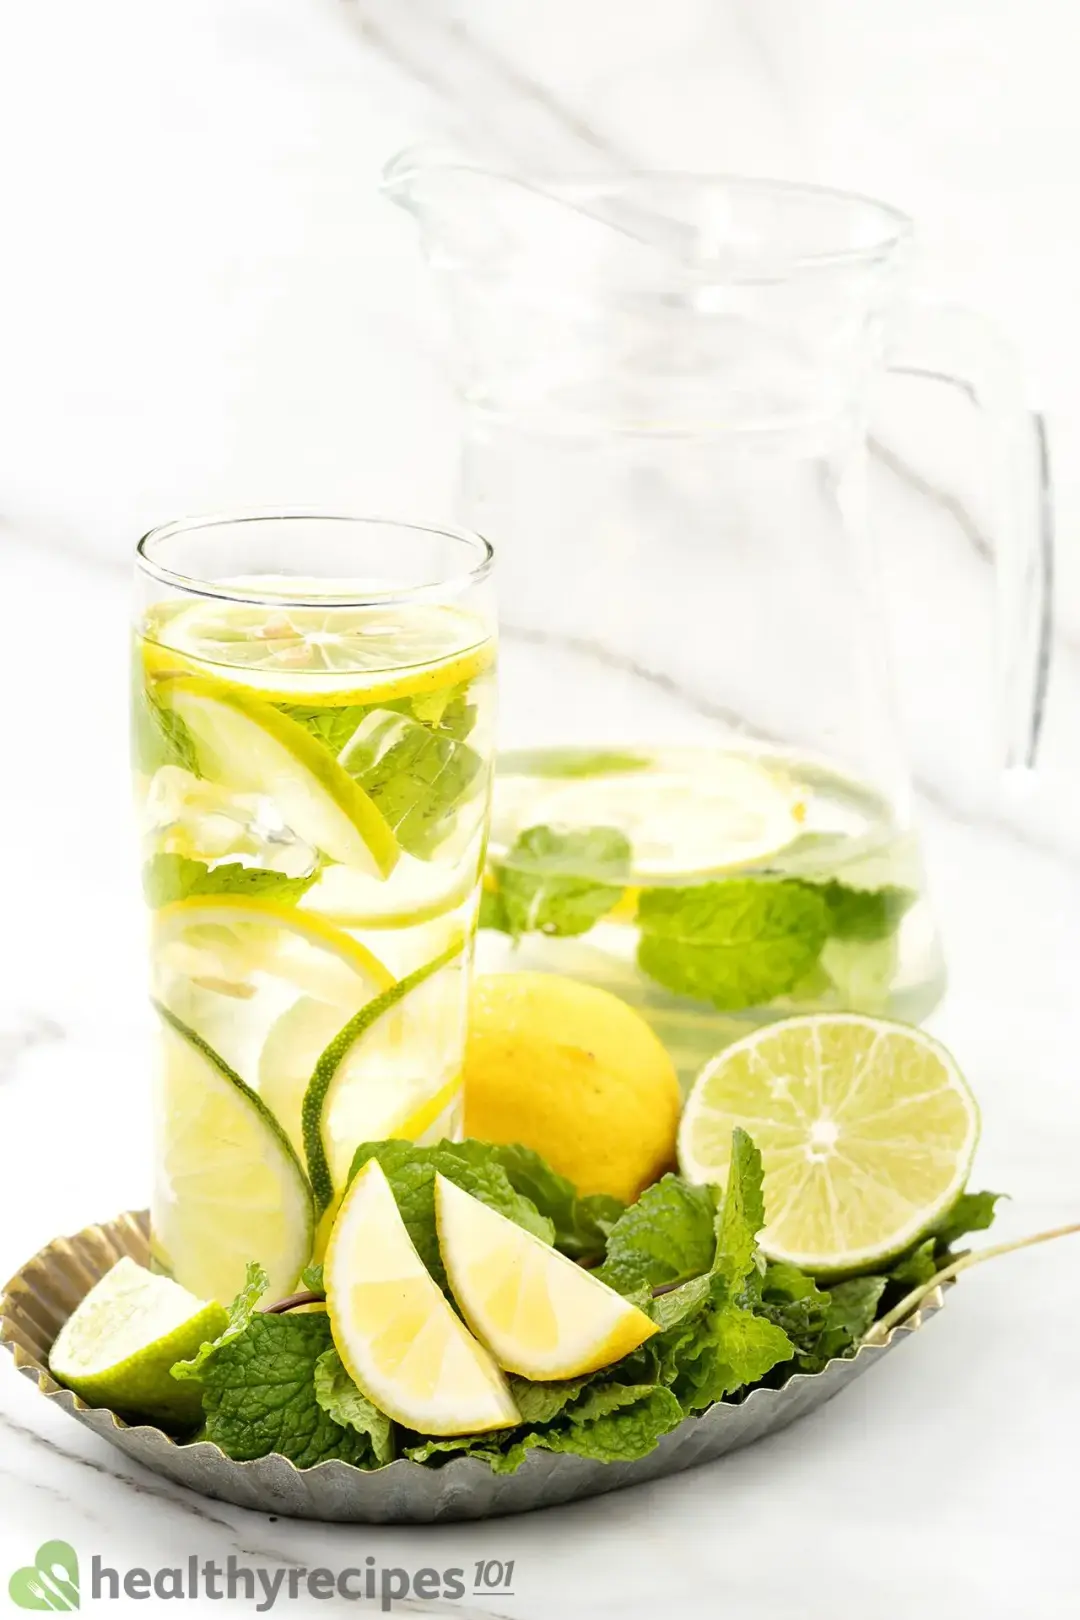 A glass and a pitcher of water full of citrus wheels, on a tray with lemon wedges and lots of mint leaves